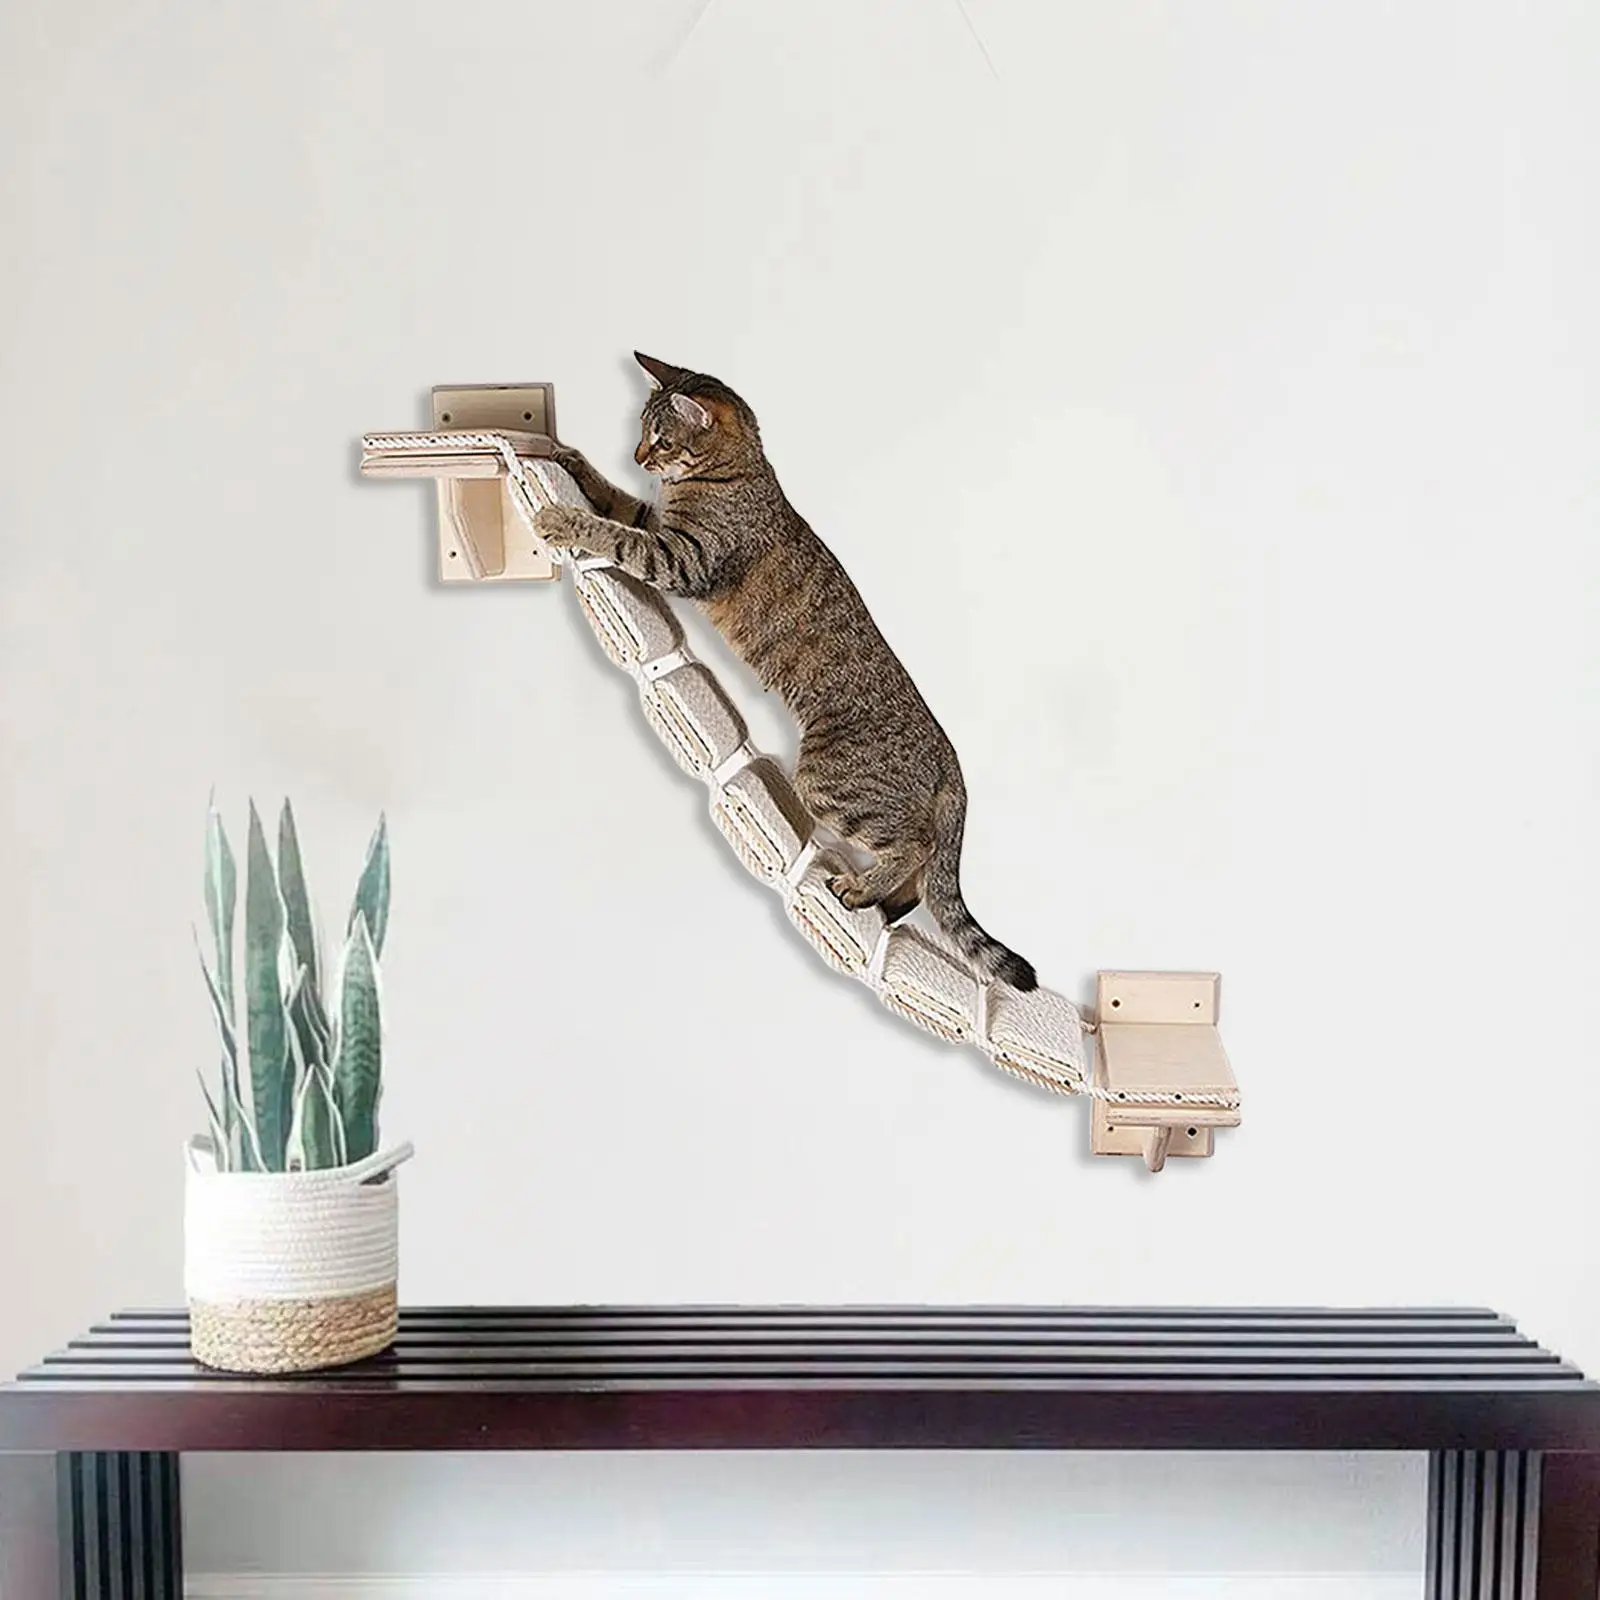 Cat Bridges wall ladder steps Ladder Walkway Cat Supplies Bridge Stairs Climbing wall Mounted for Indoor Cats Pet Cats Lounging